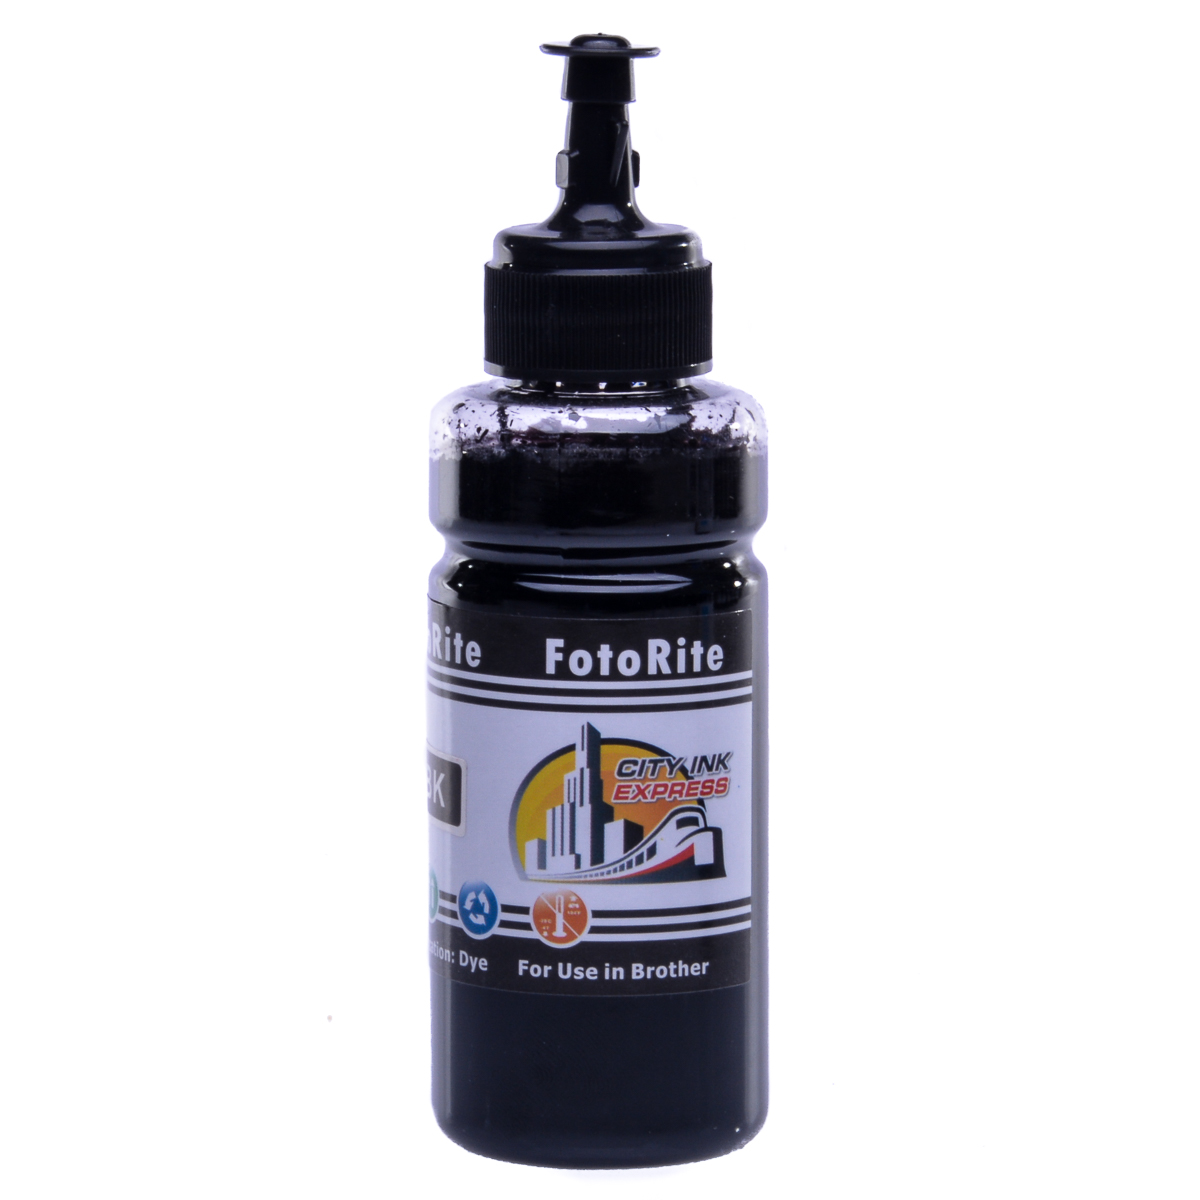 Cheap Black dye ink replaces Brother MFC-T800W - BT6000BK